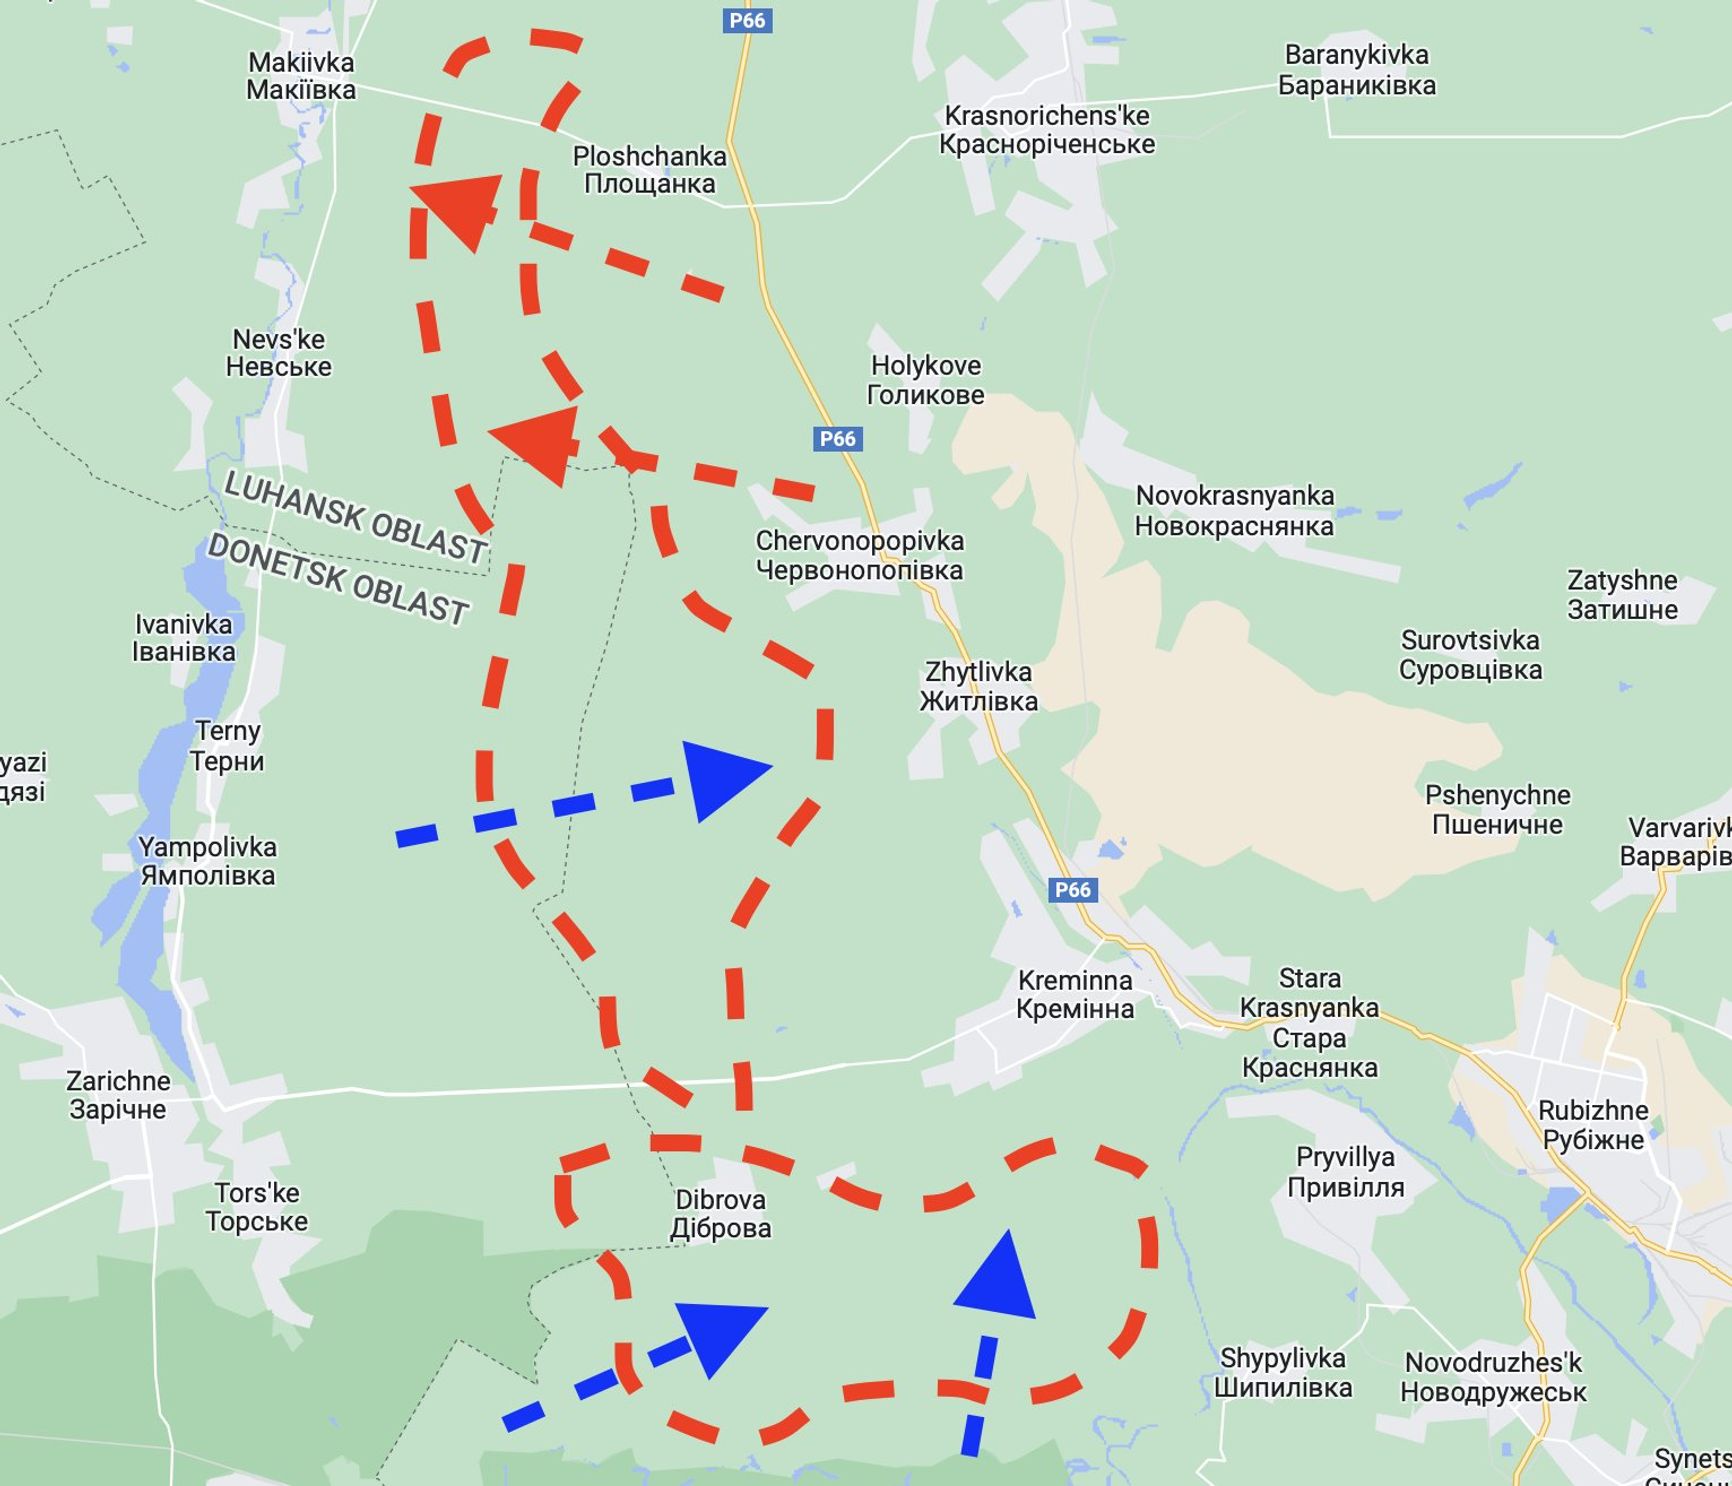 The current situation in the Luhansk direction. Fighting around Kreminna and west of Zhytlivka